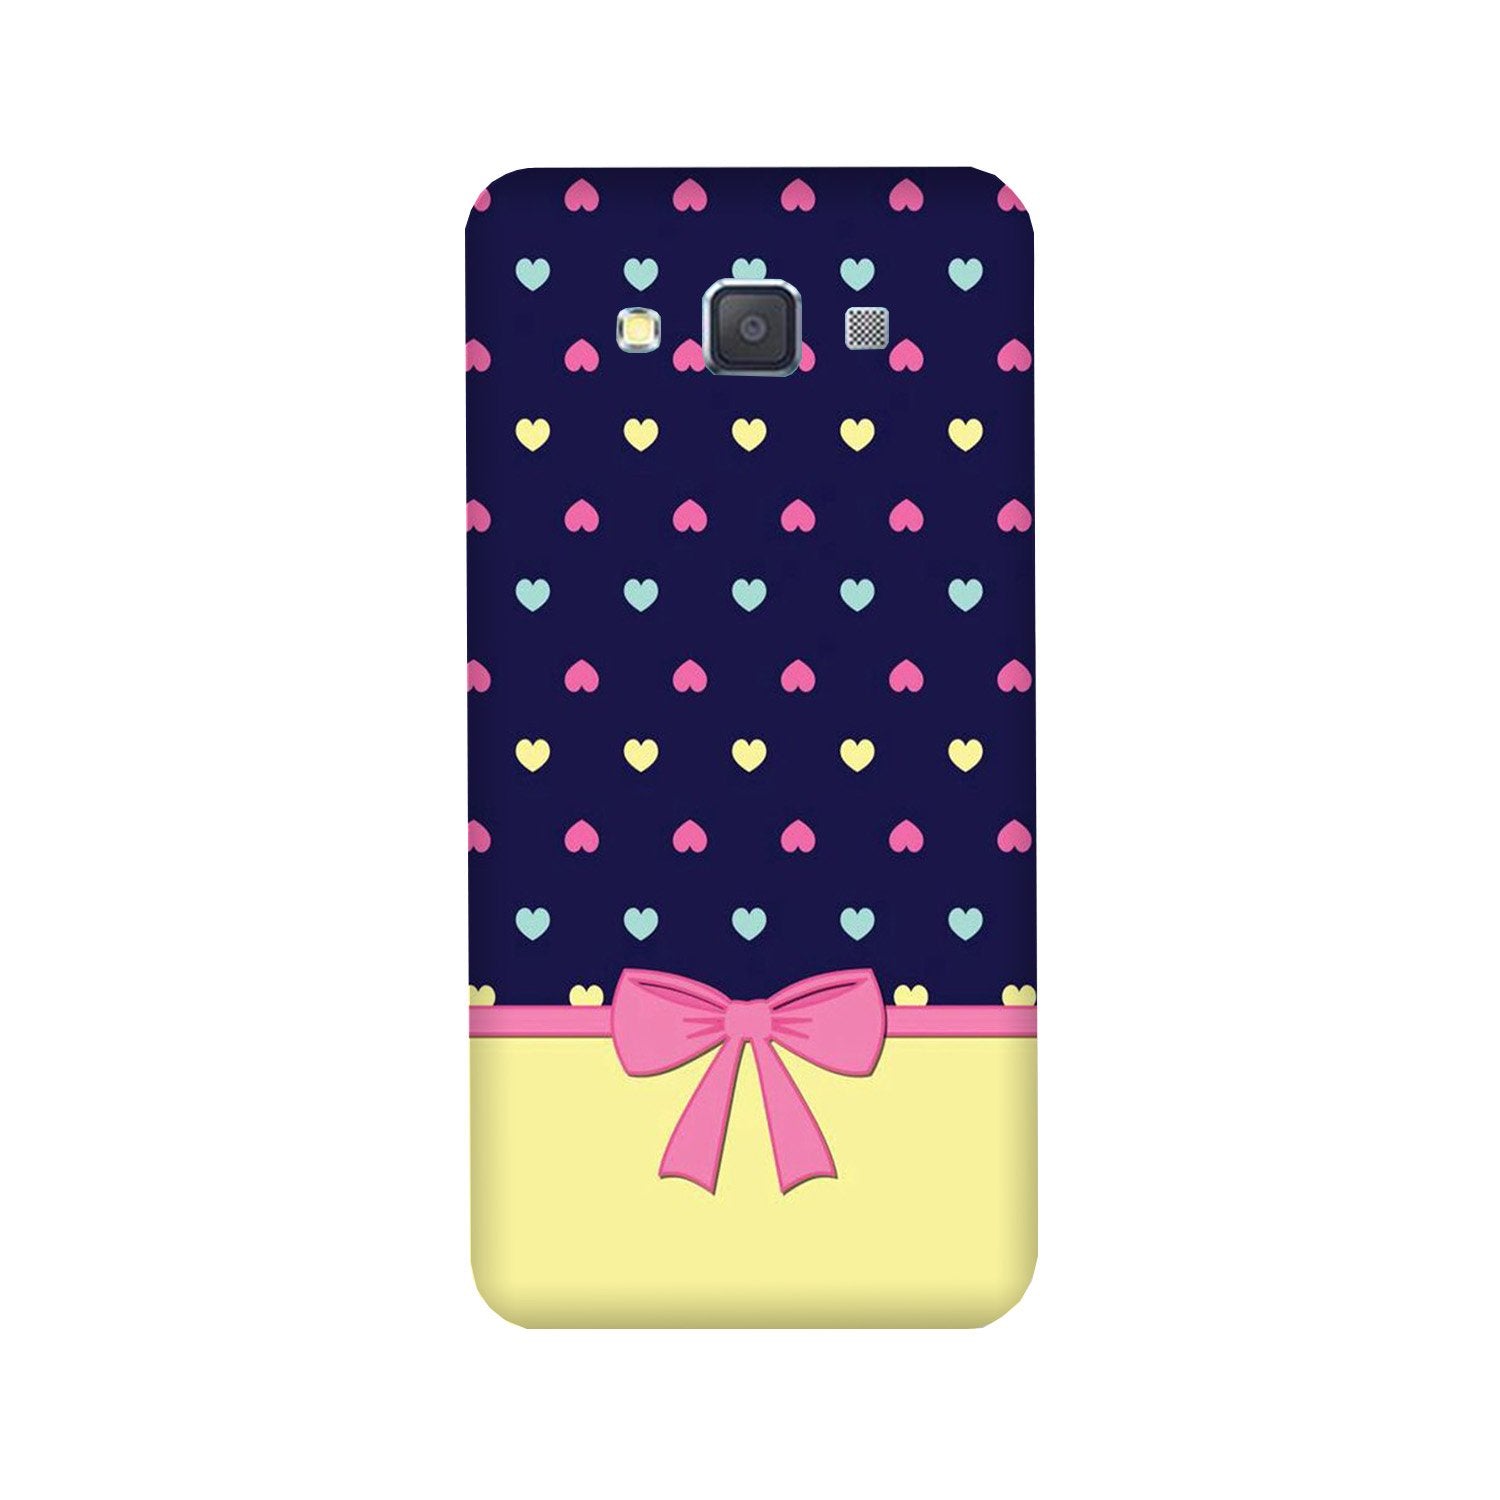 Gift Wrap5 Case for Galaxy A5 (2015)